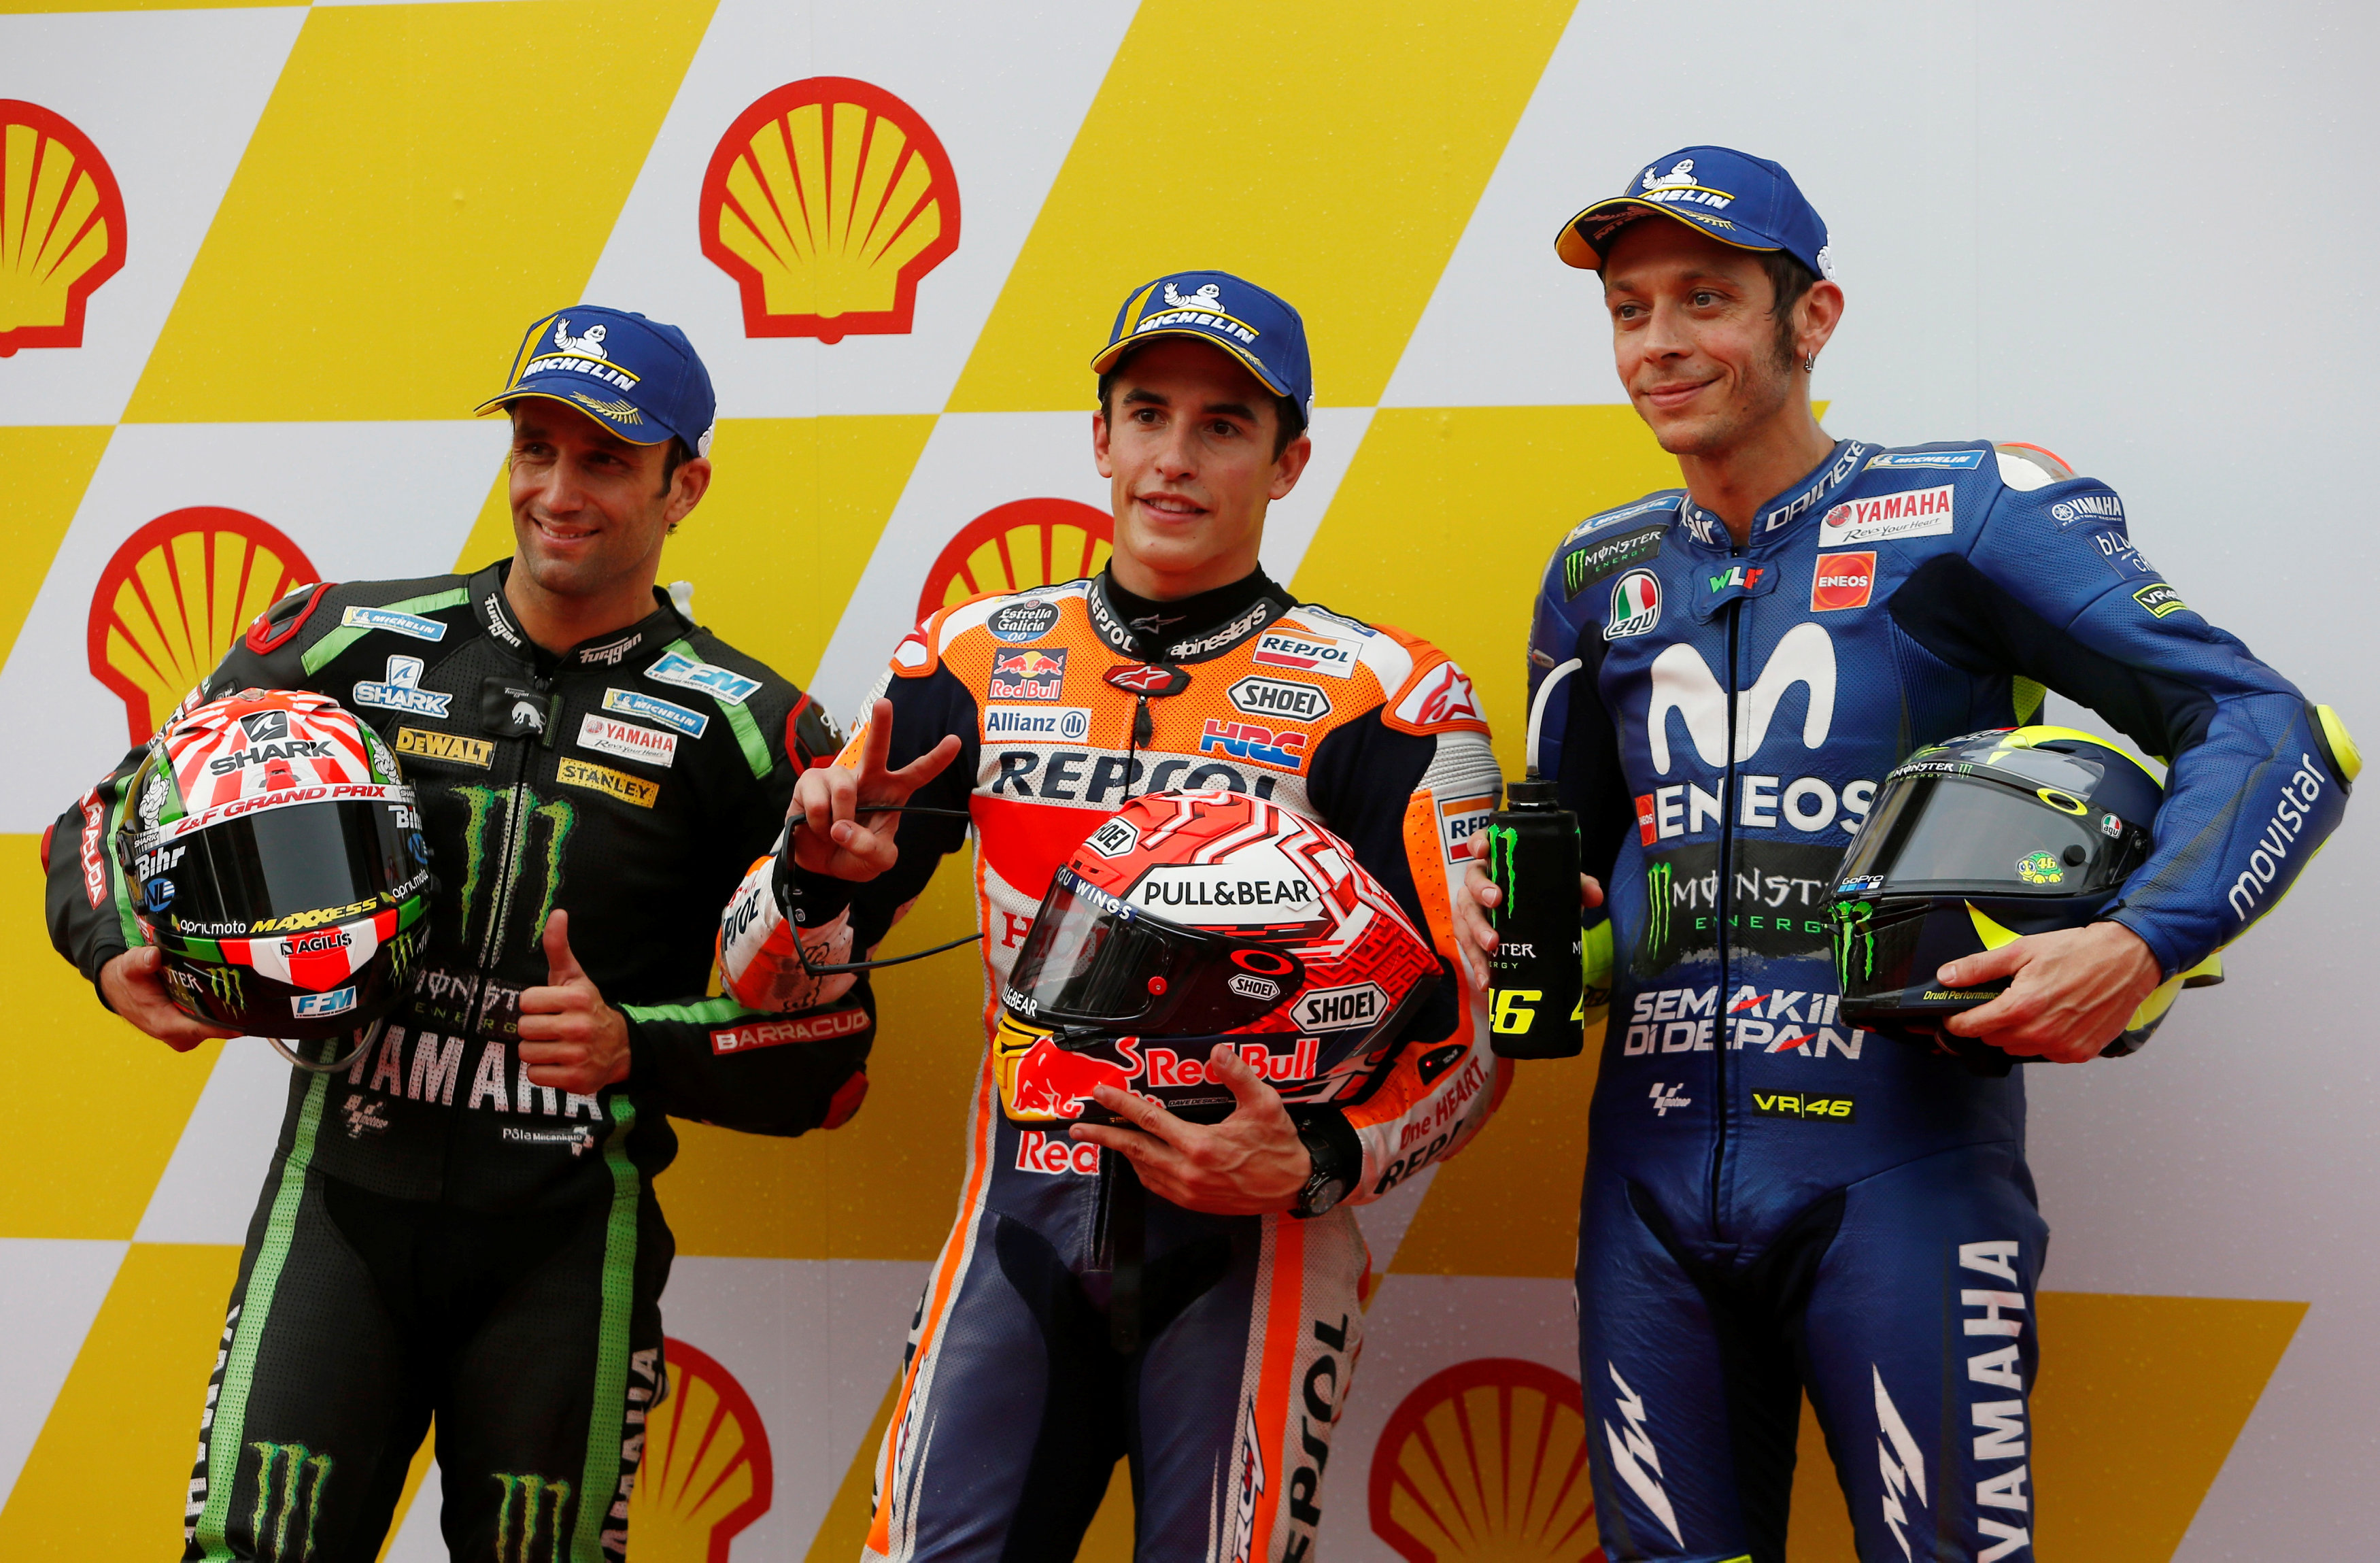 Motorsport: Dominant Marquez on pole after Malaysia storm